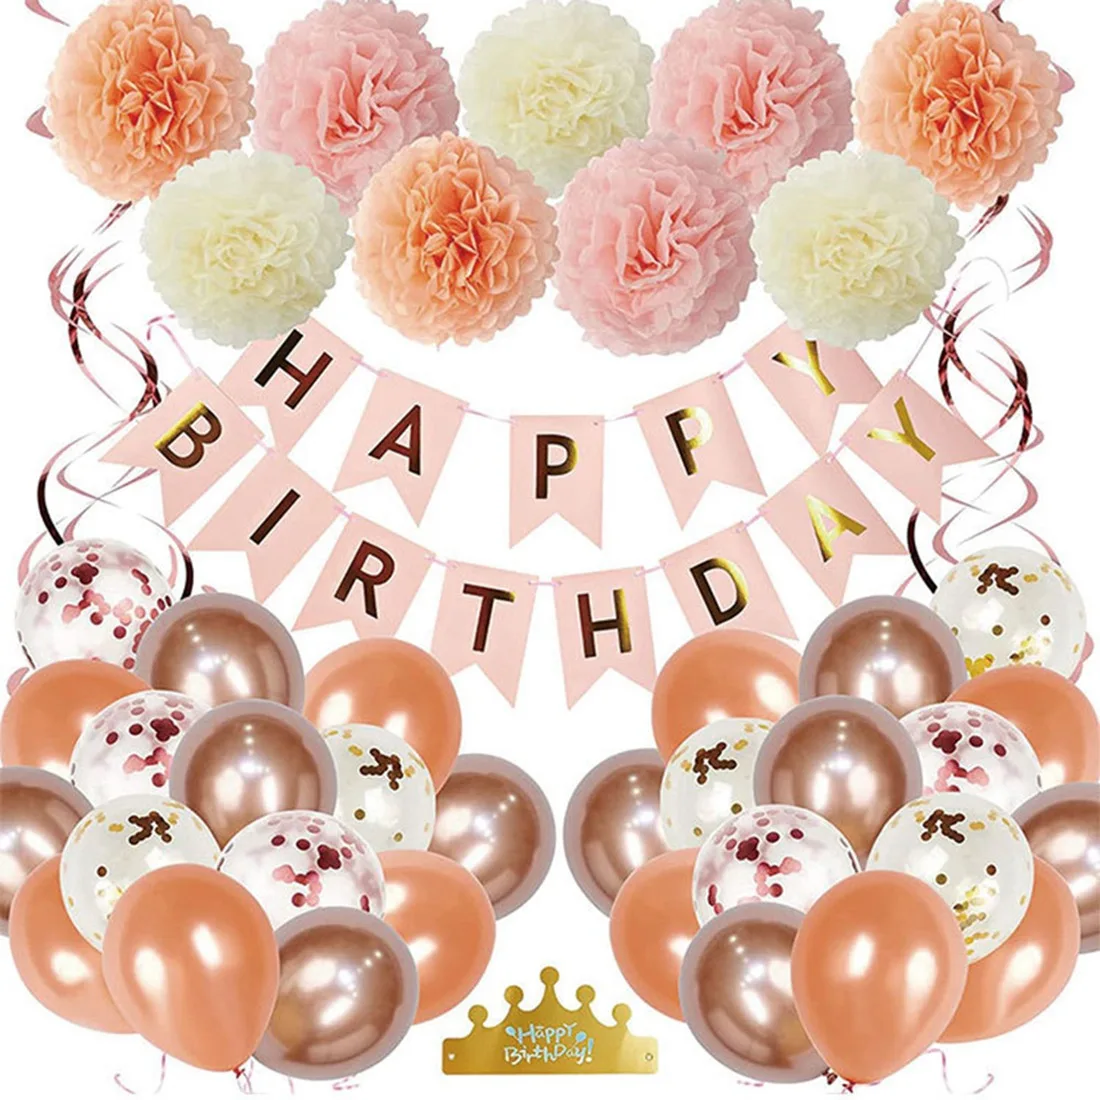 

1Set Rose Gold Birthday Party Decorations Set with Happy Birthday Banner,DIY Cake Topper,Circle Dots Garland